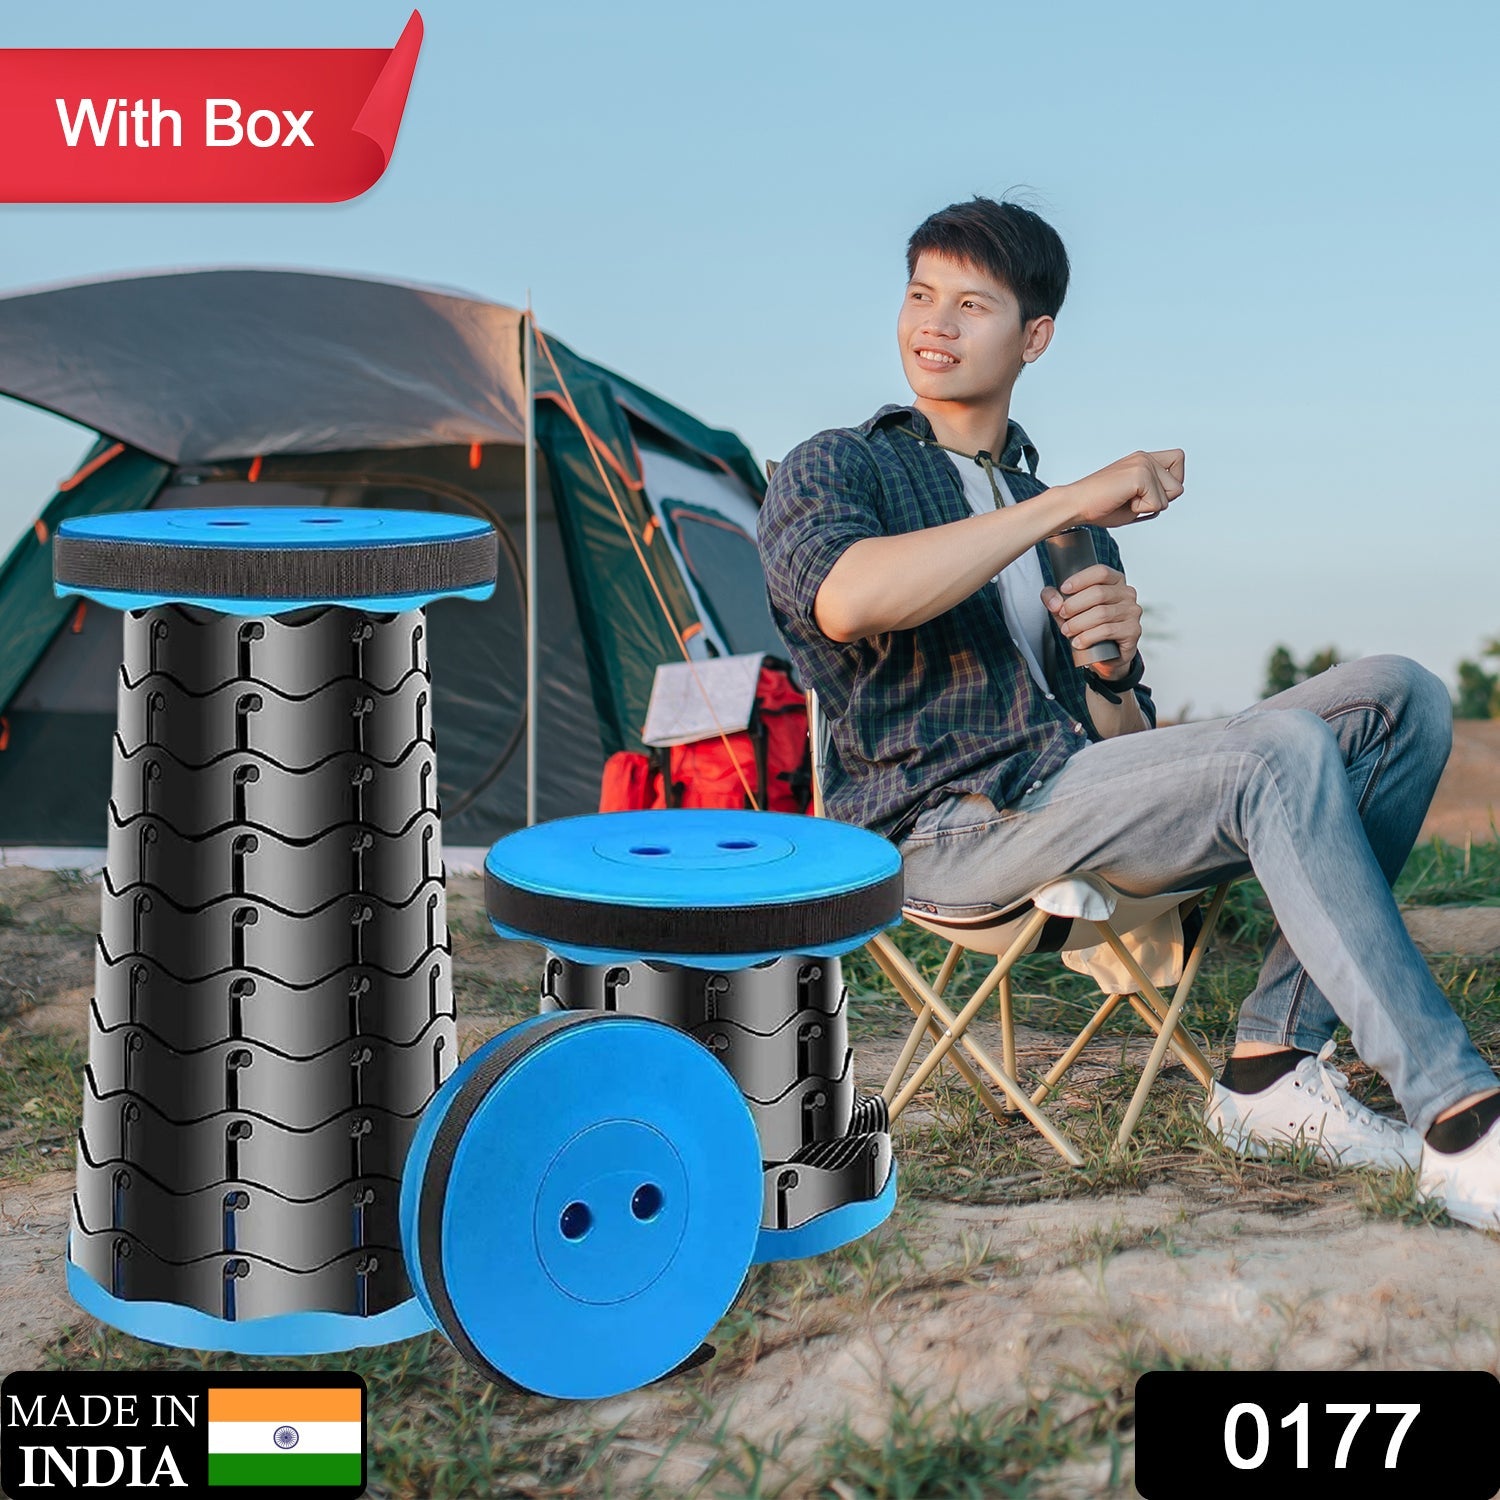 Retractable Folding Stools Portable Lightweight for Indoor and Outdoor Travel, Fishing, Camping, Garden Use